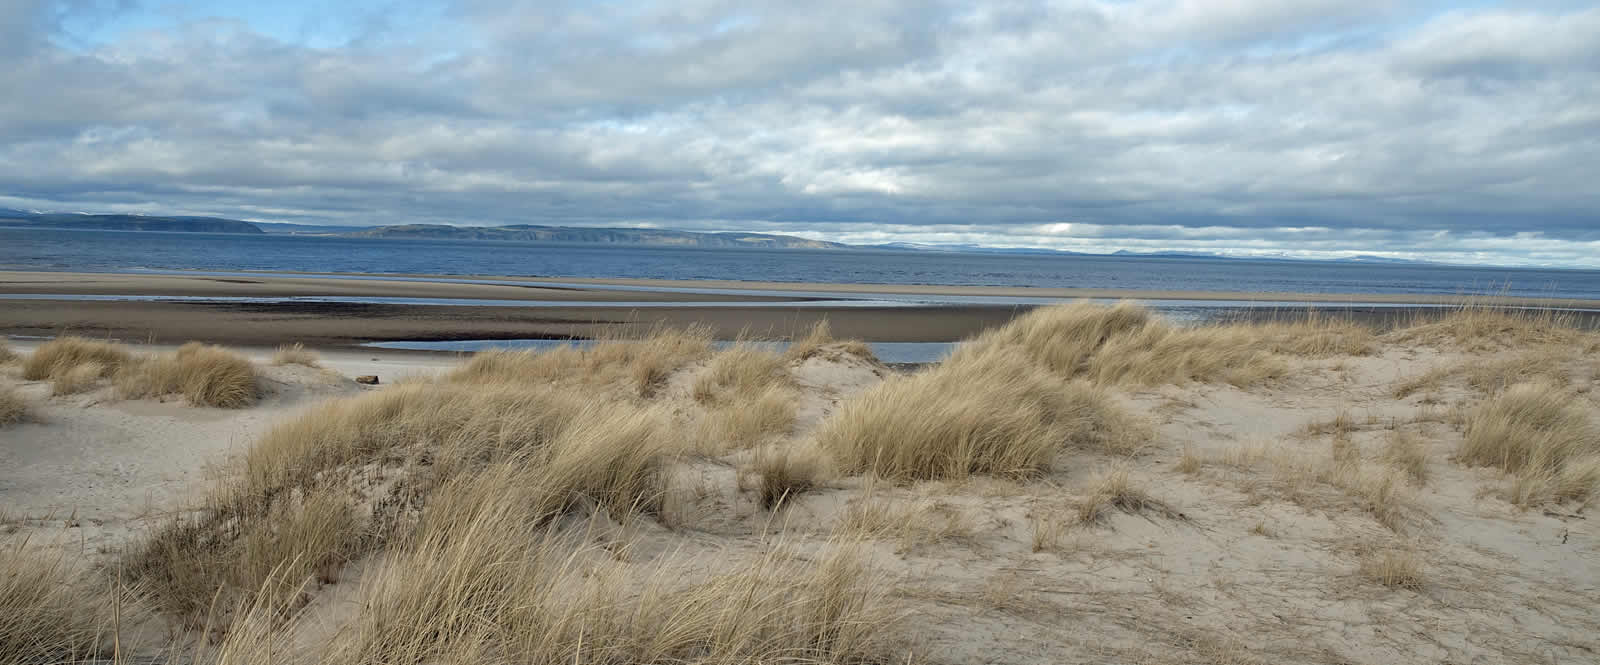 Guide to Nairn in Moray